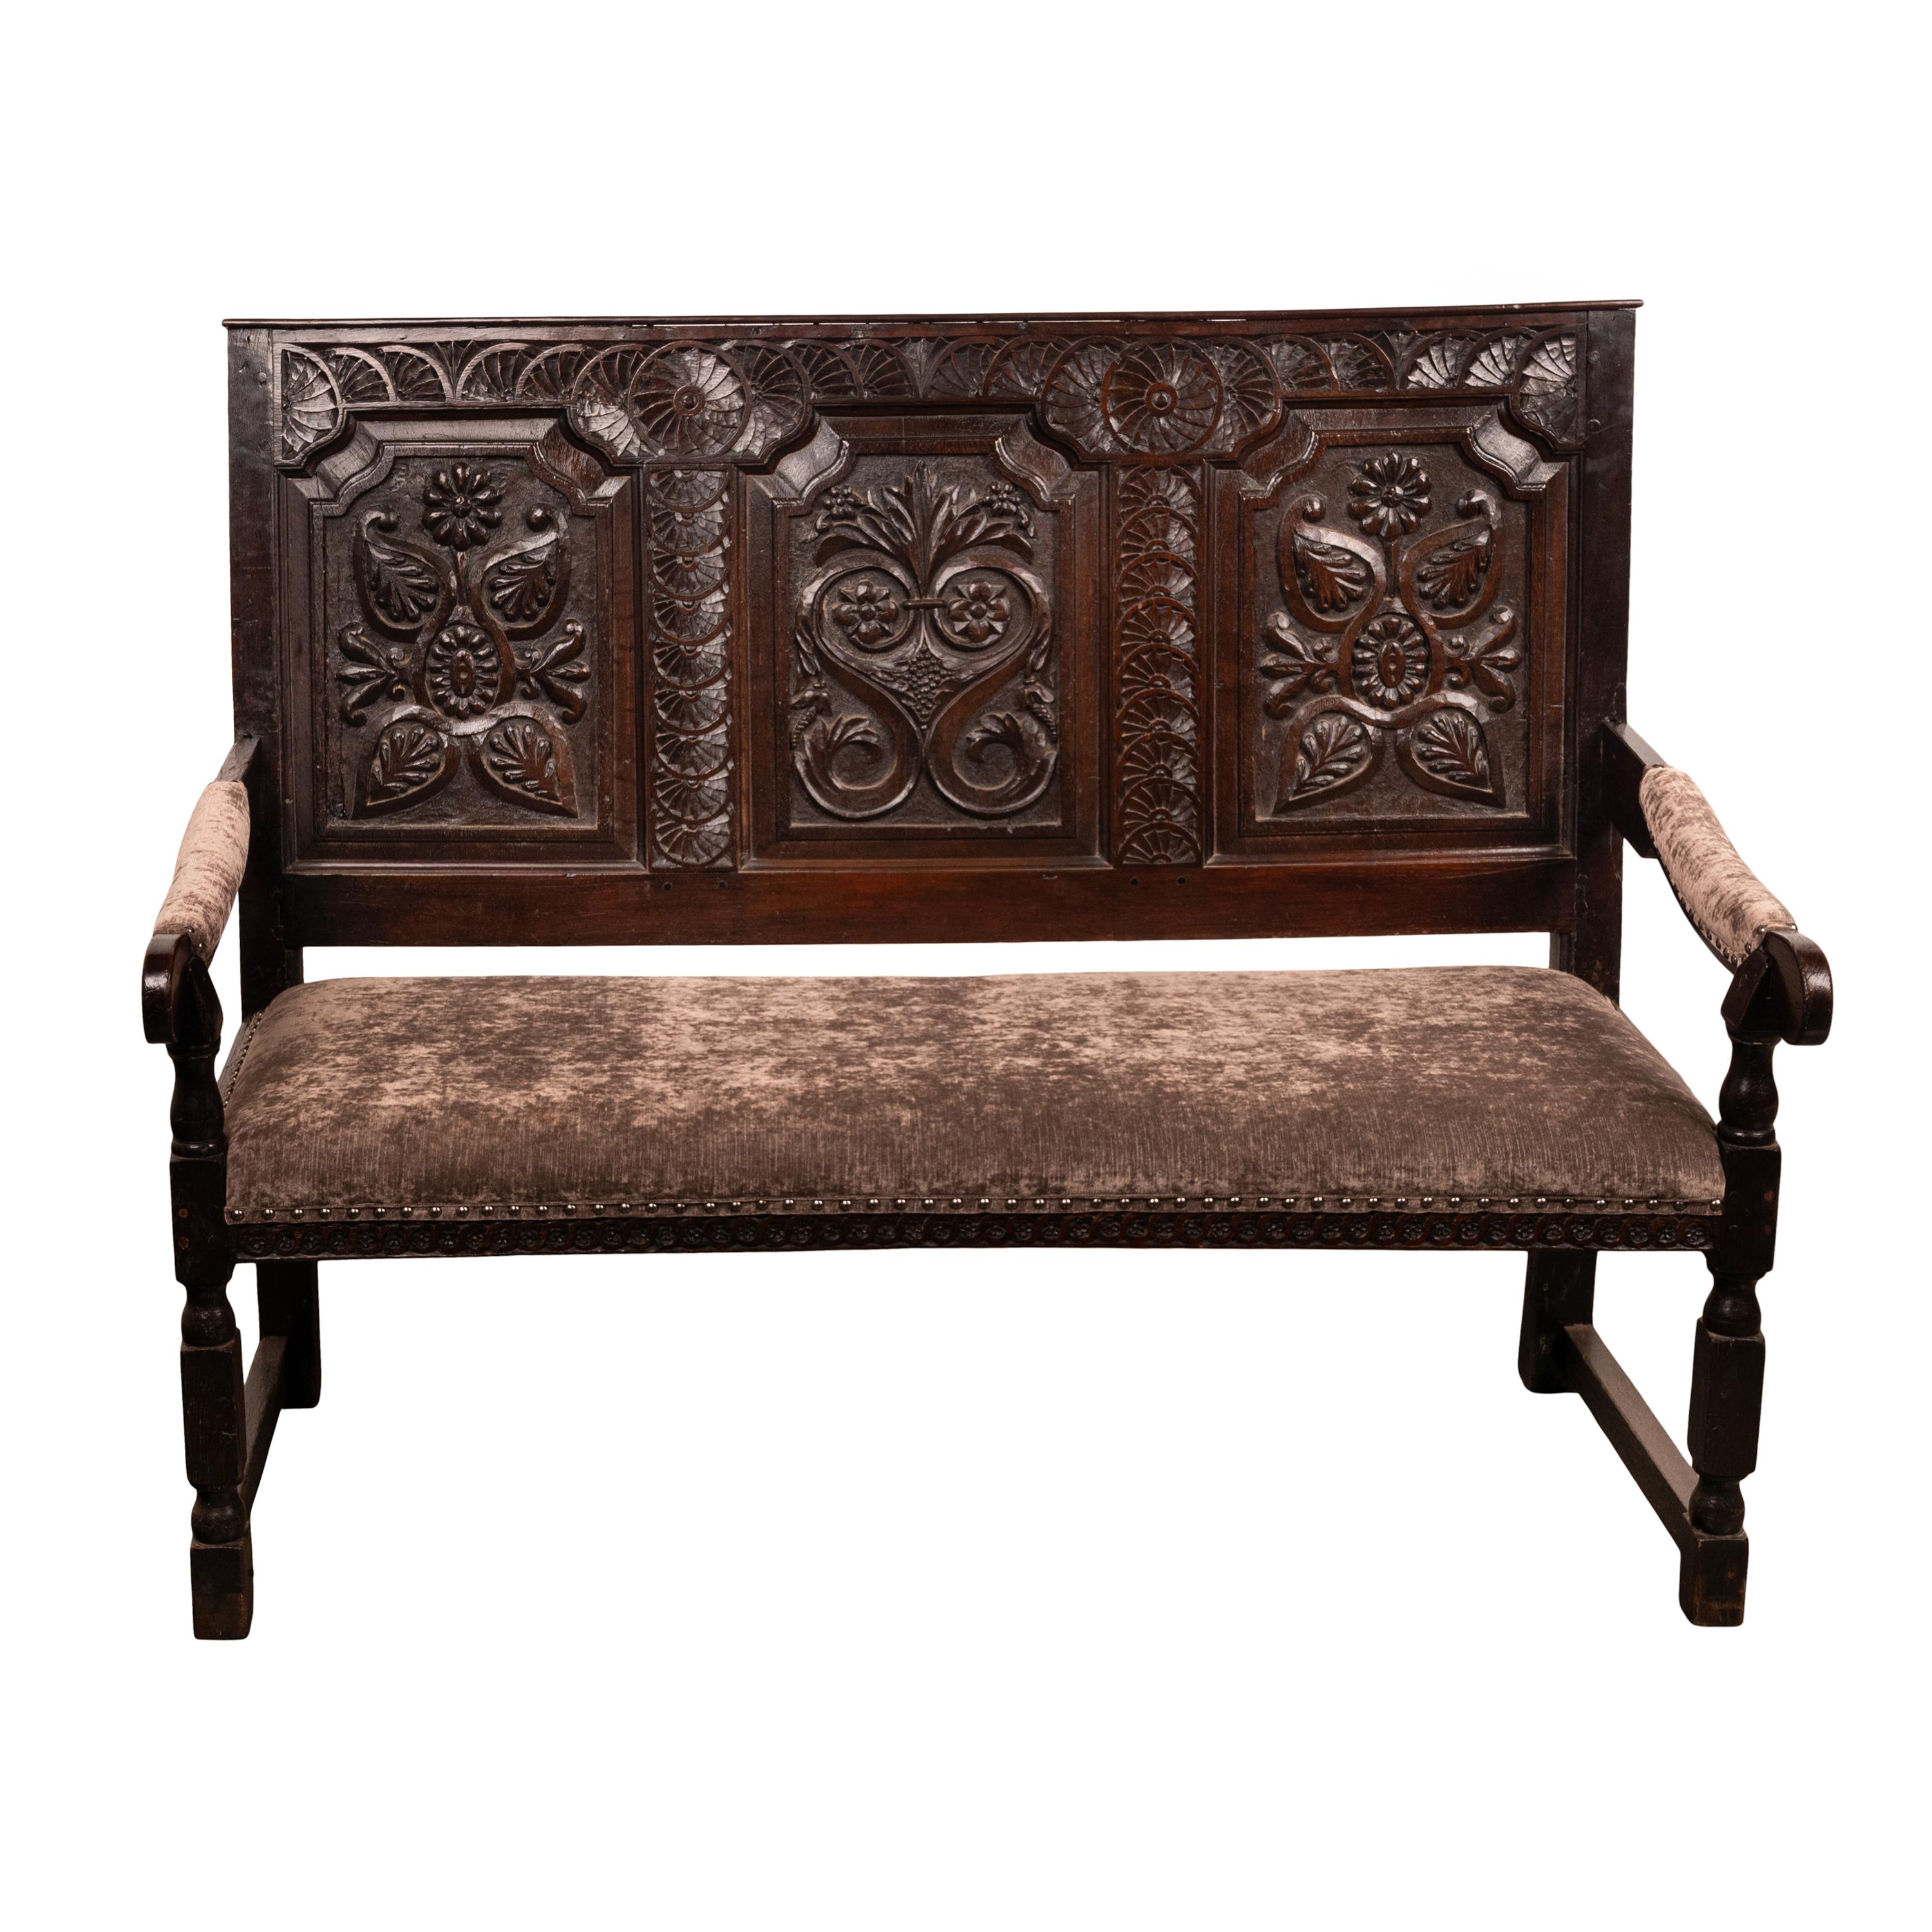 Antique English 17th Century King Charles II Carved Oak Settle Sofa Bench 1680 For Sale 2